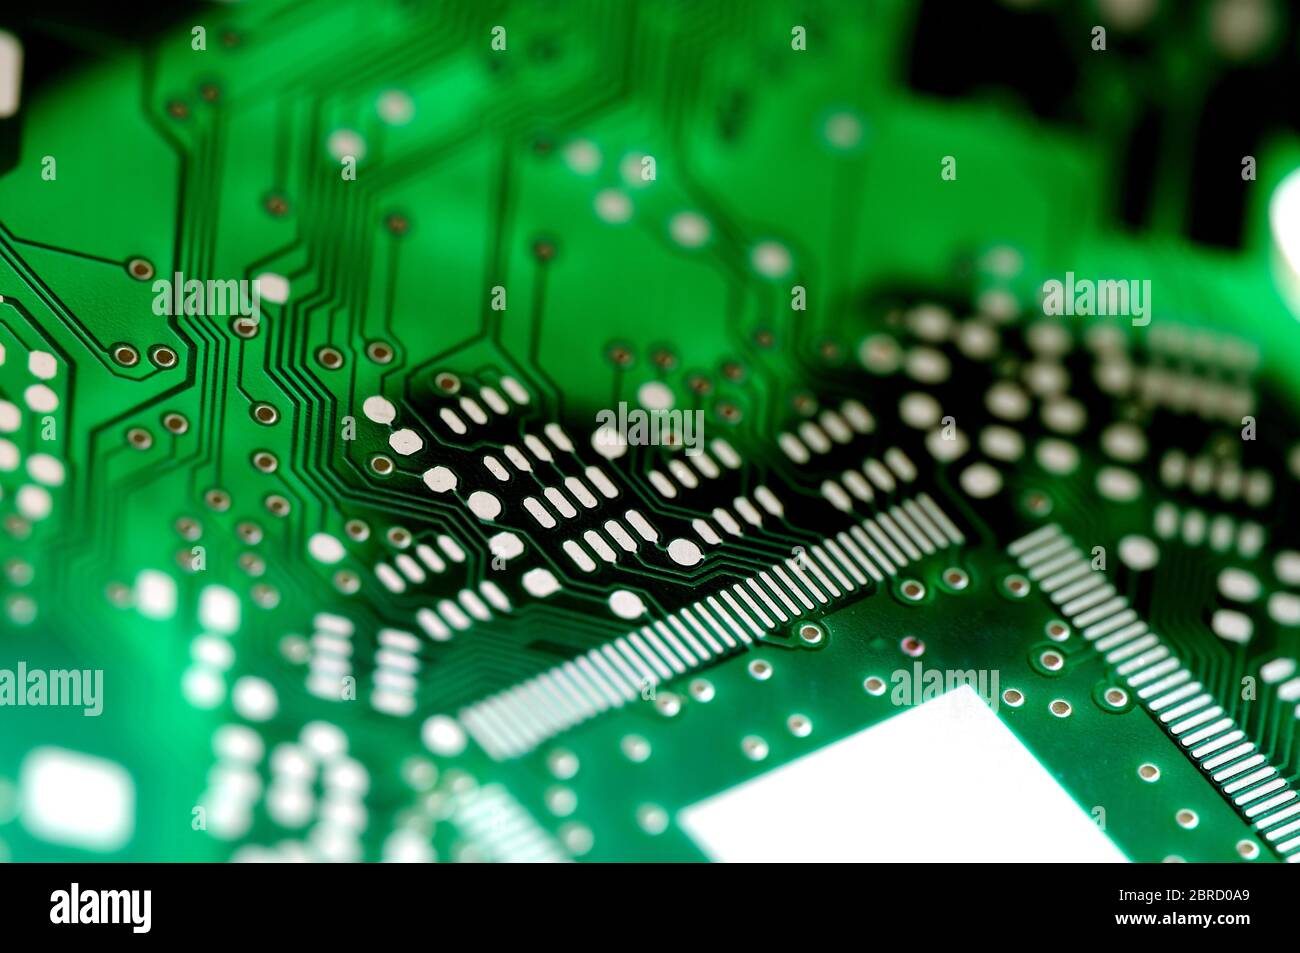 Printed circuit boards, Germany Stock Photo